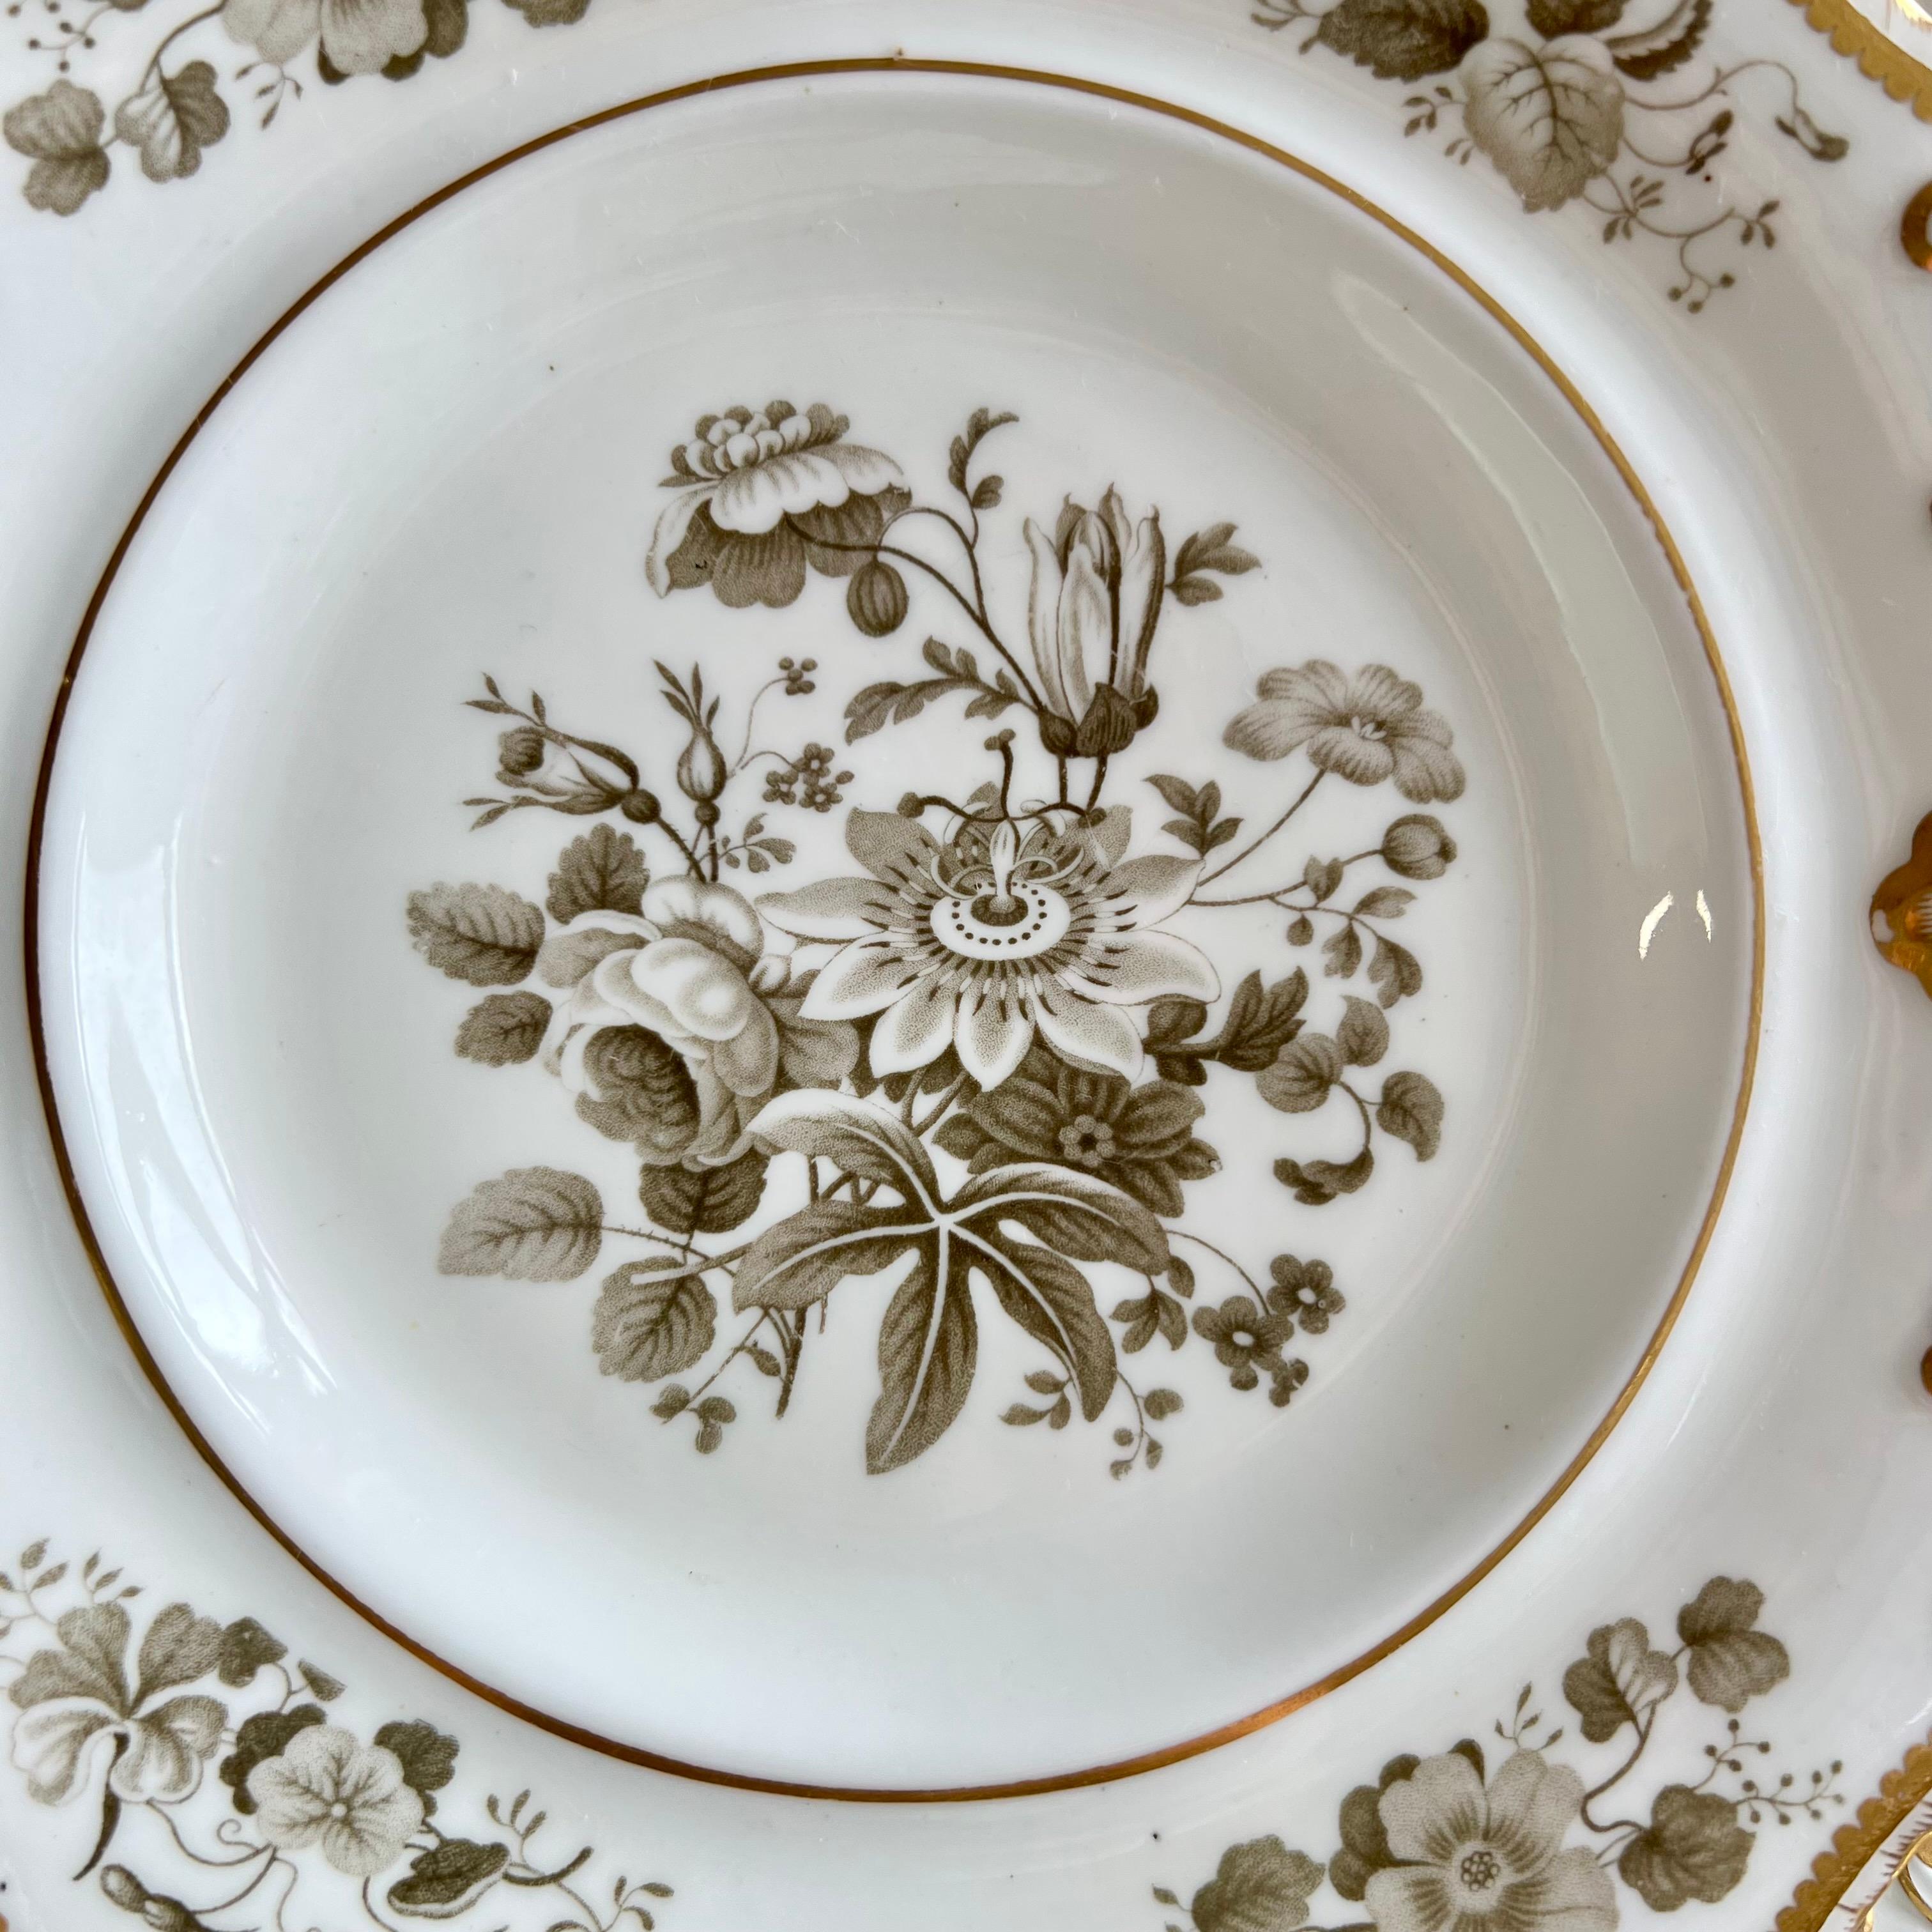 Porcelain Minton Dessert Service, Inverted Shell White with Monochrome Flowers, ca 1830 For Sale